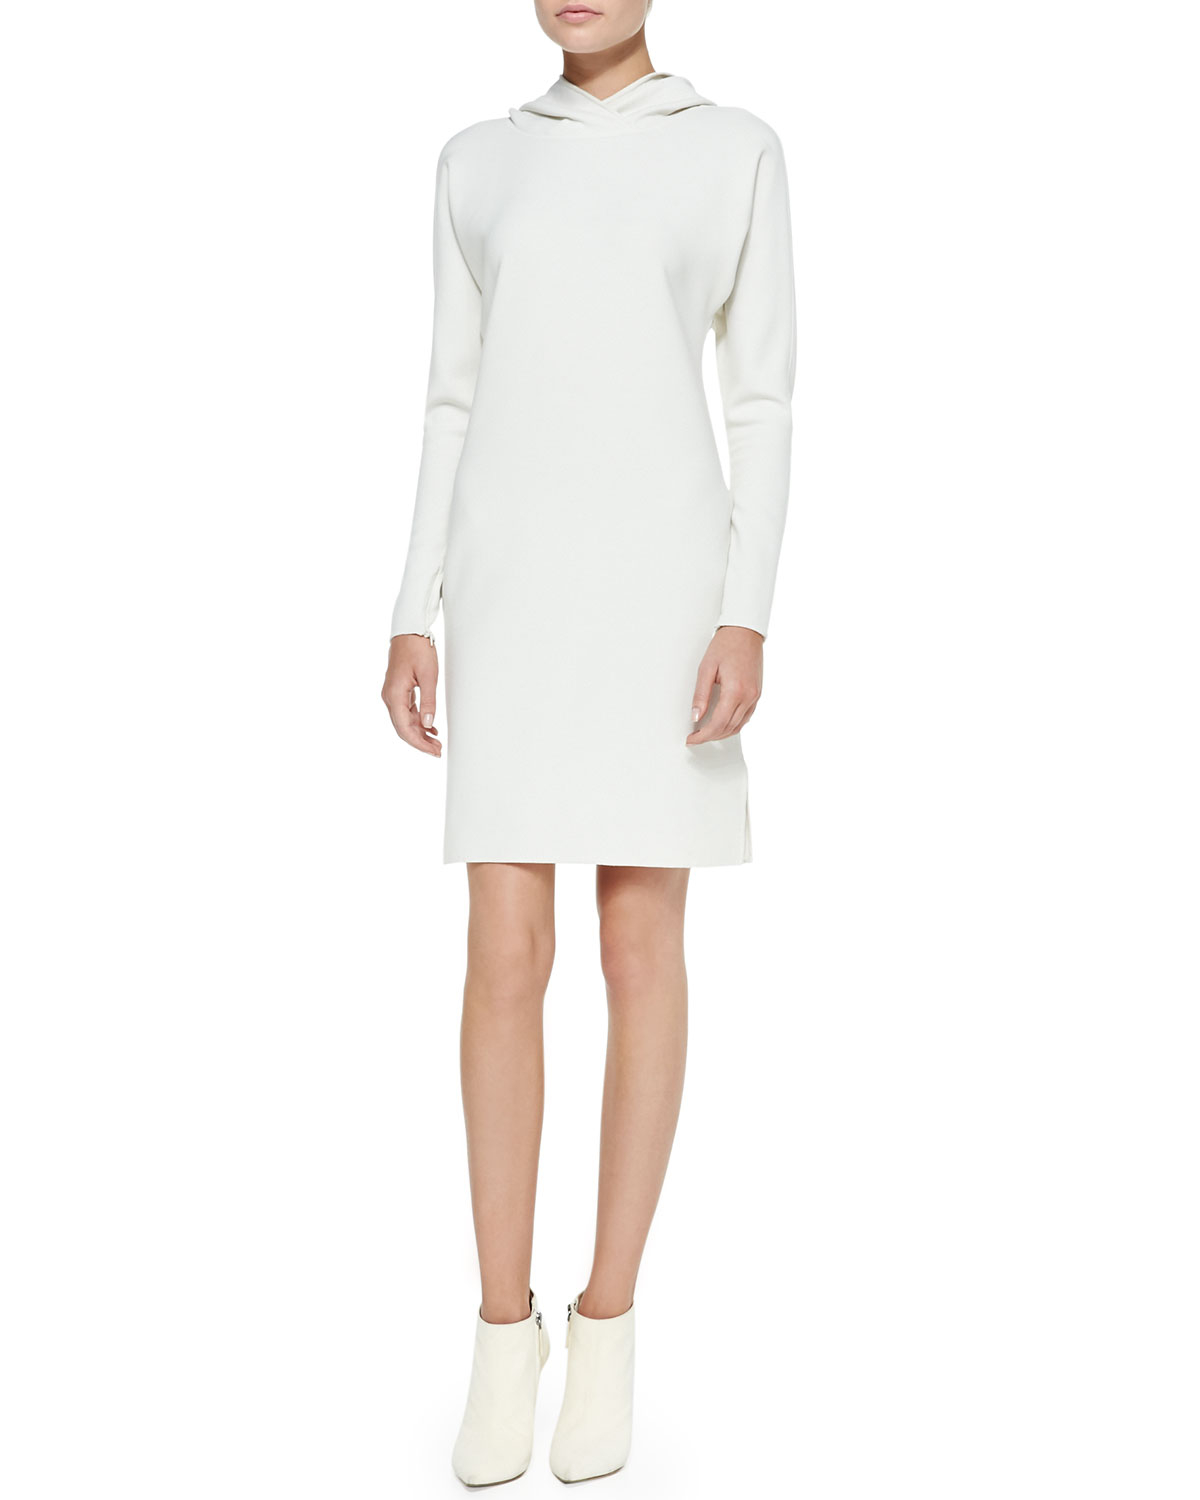 Ralph lauren collection Charisses Hooded Tunic Dress in White (OFF ...